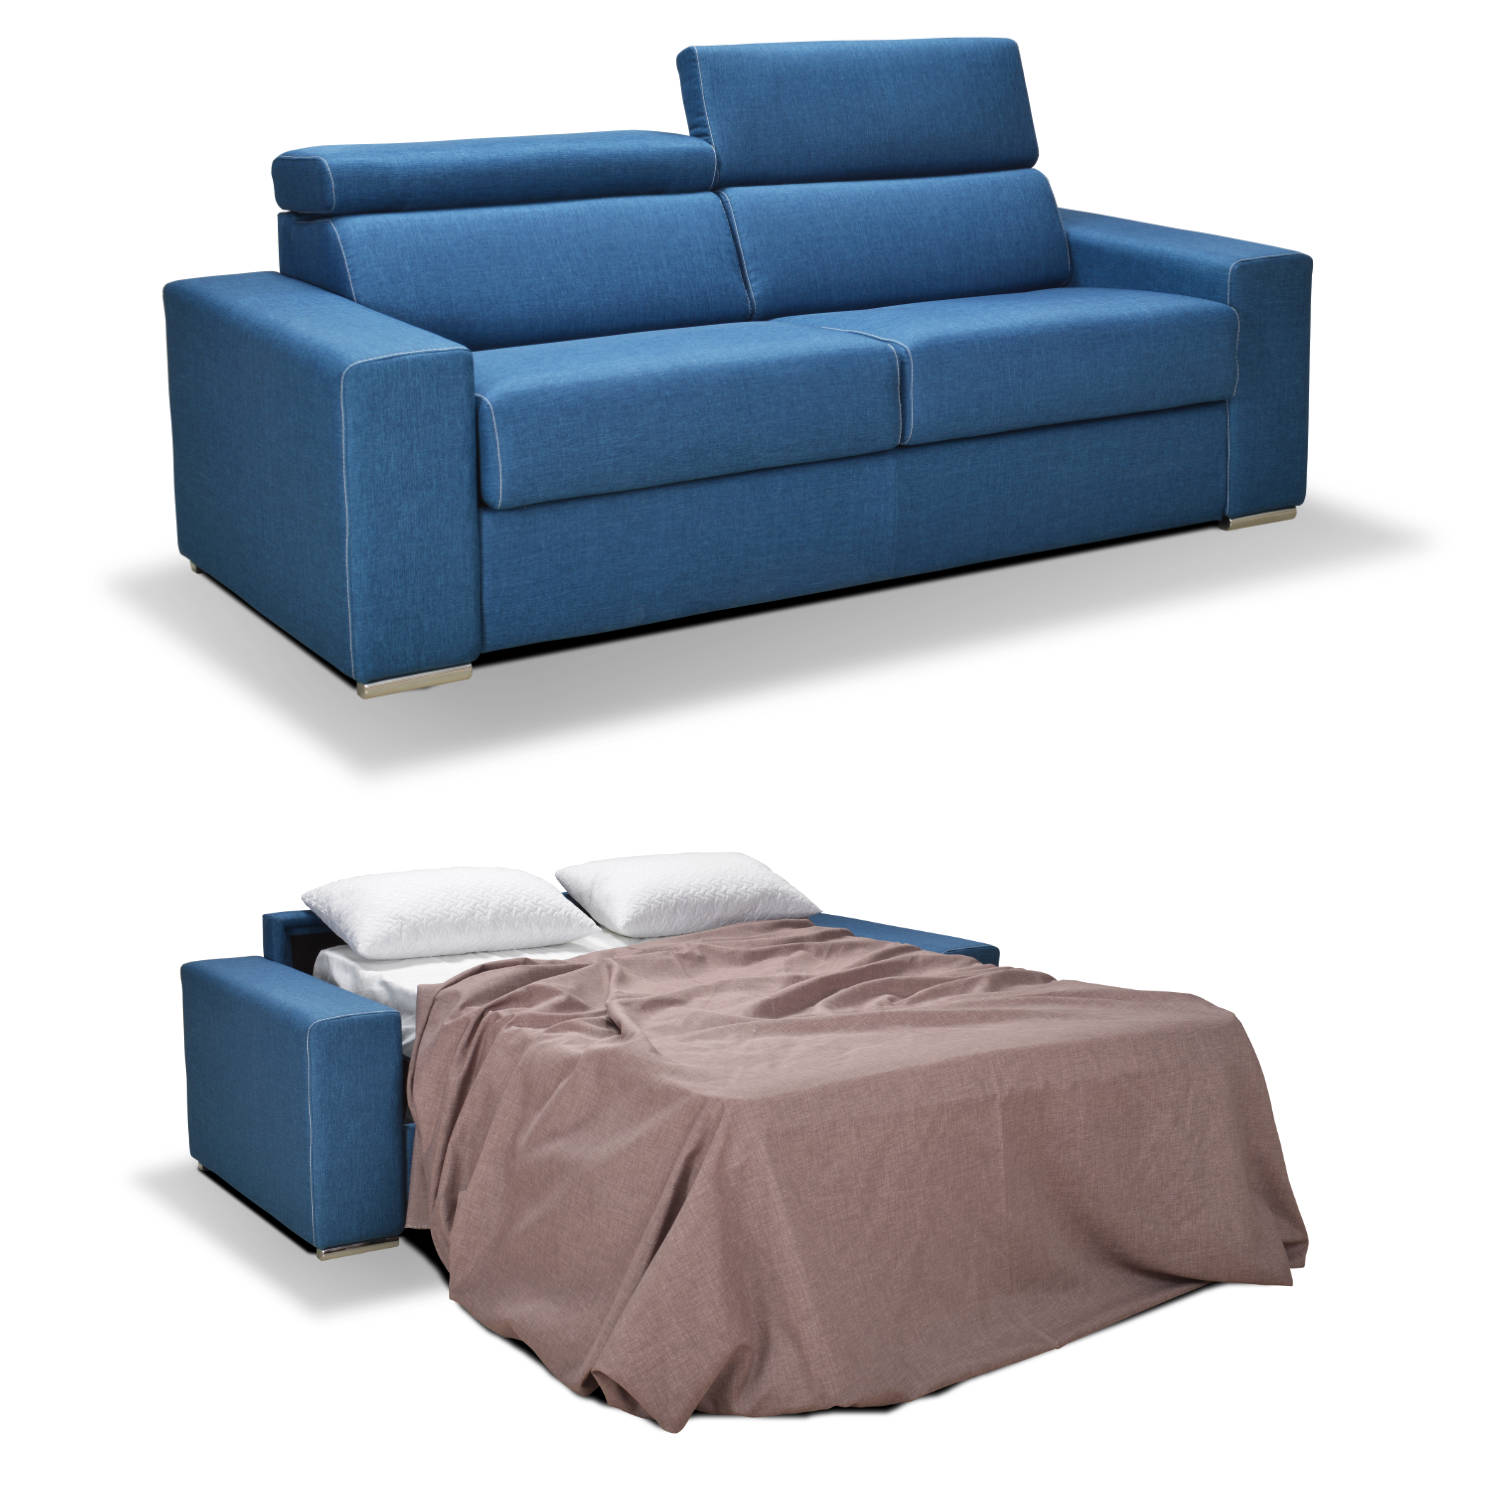 https://expandfurniture.com/wp-content/uploads/2018/10/Dormire-memory-foam-easy-open-sofa-bed-from-italy-roma-blue.jpg